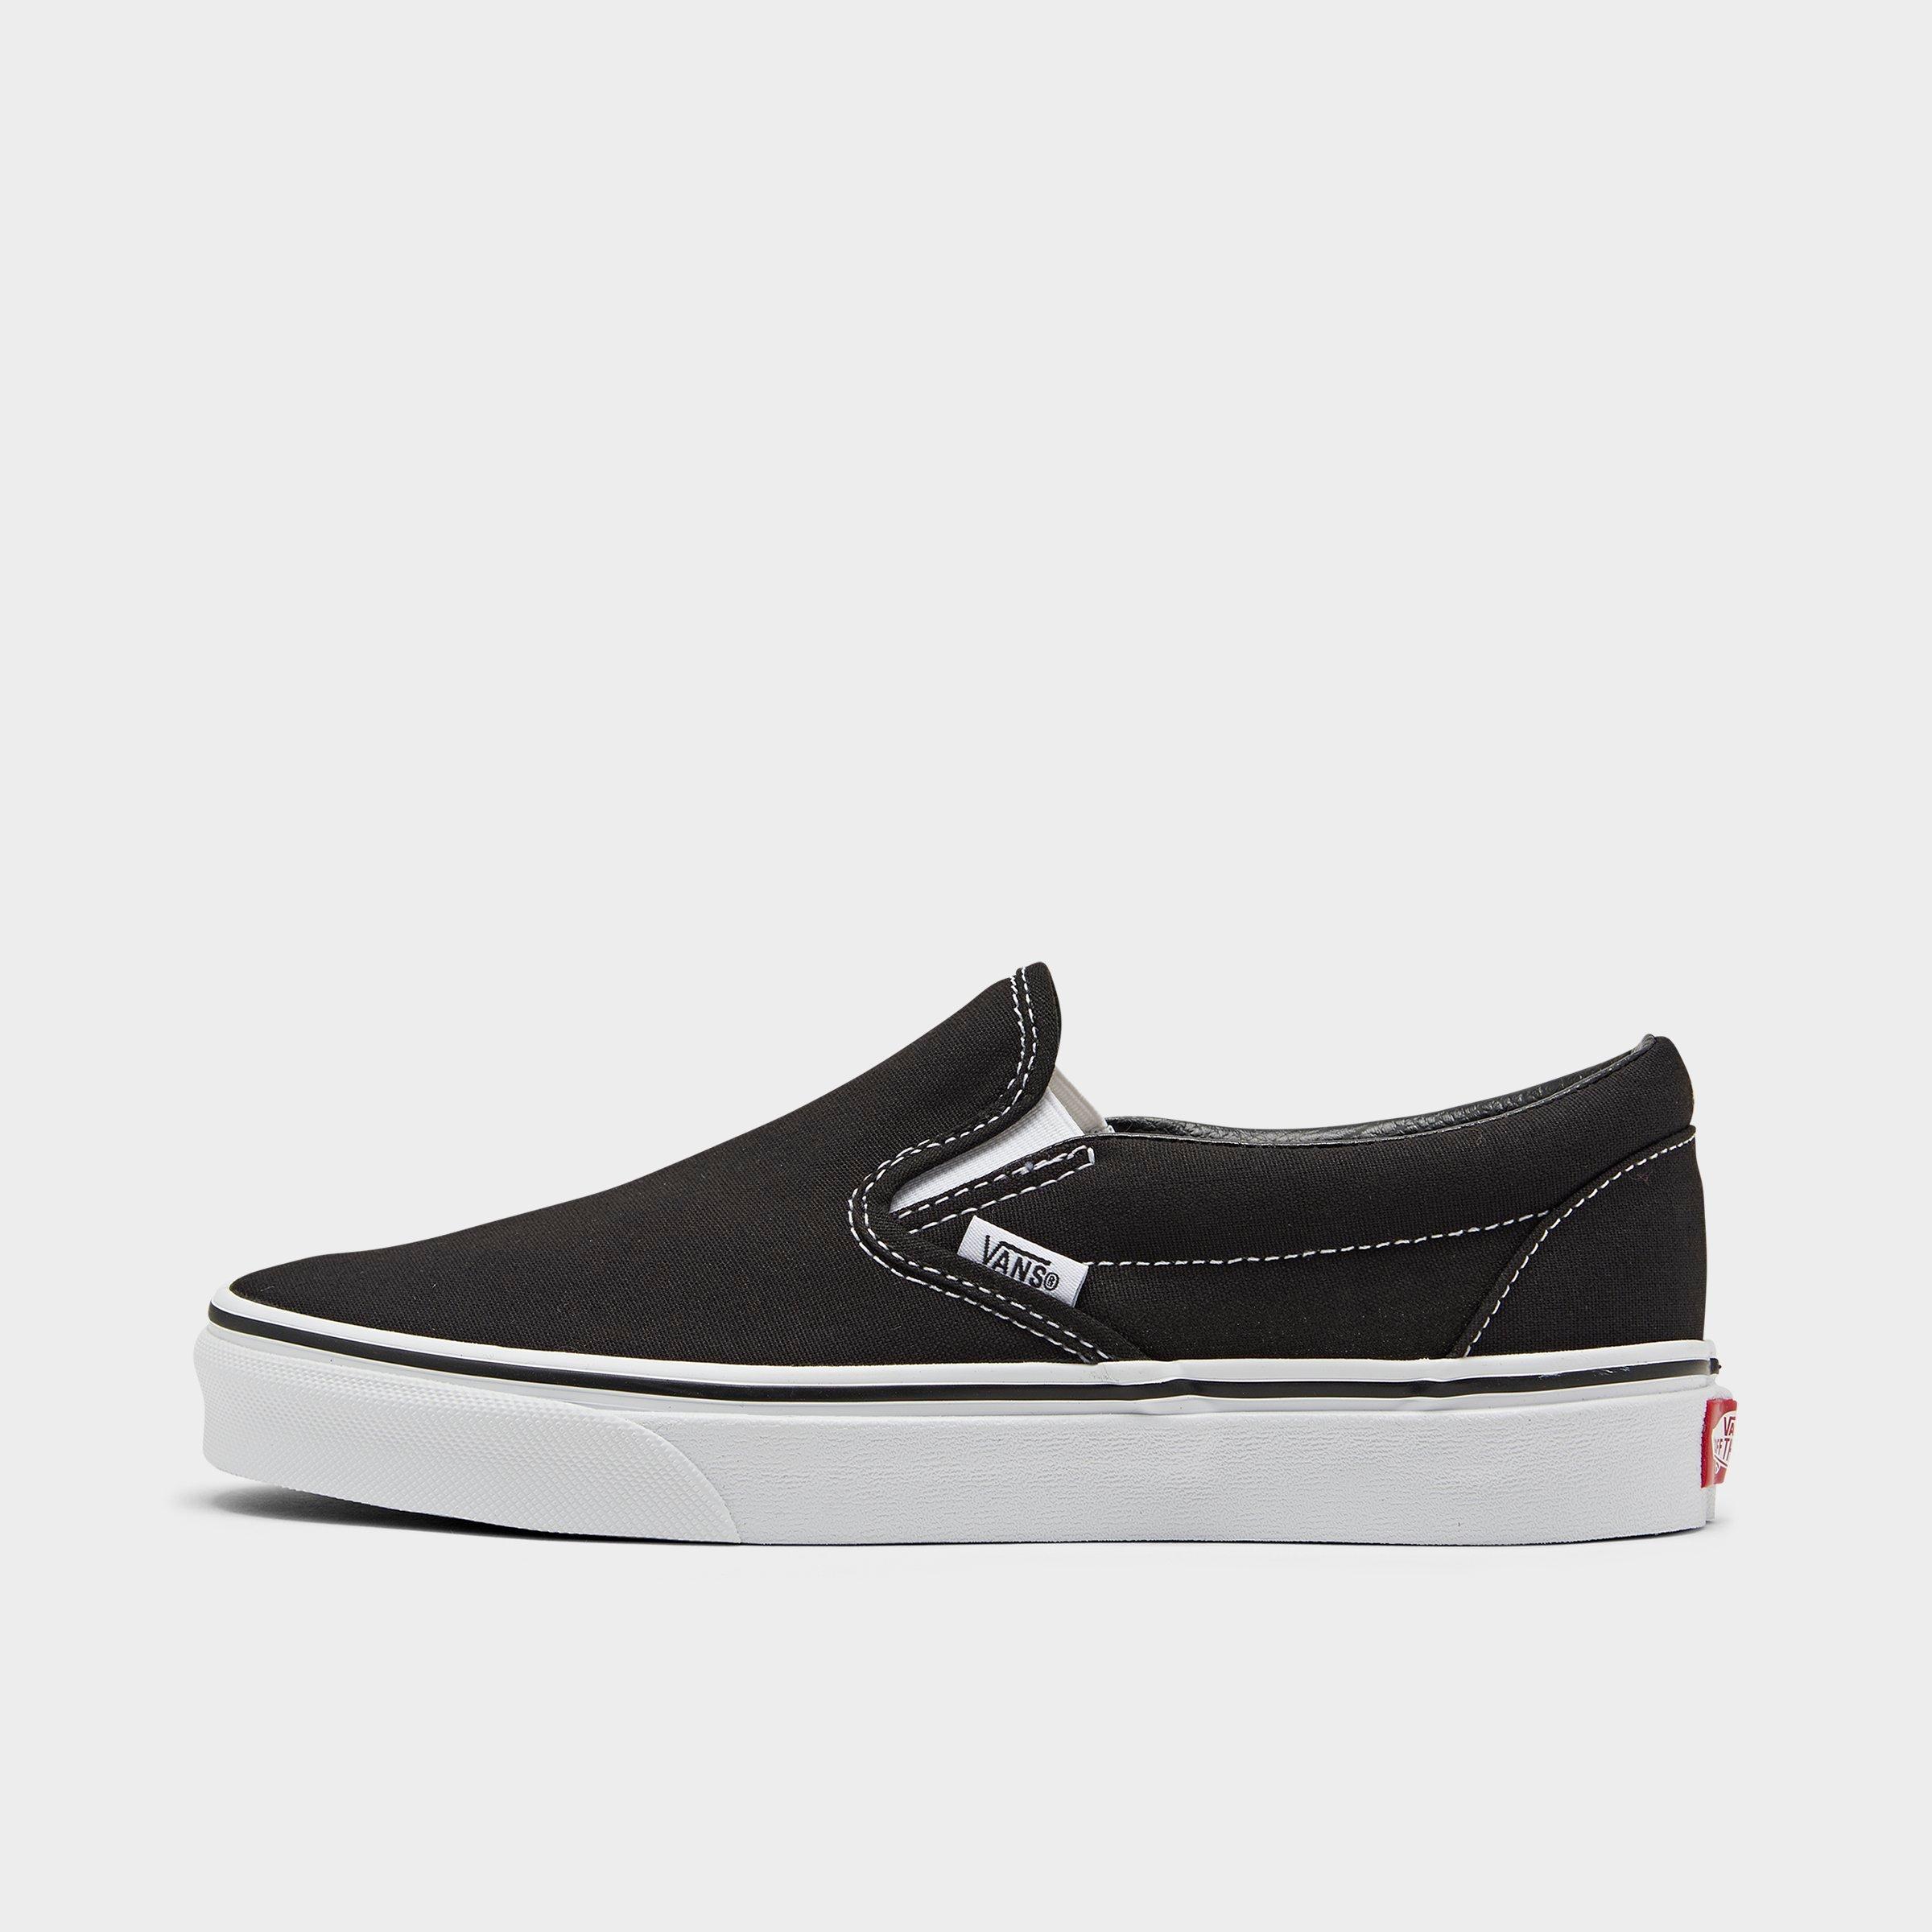 Vans Classic Slip-On Casual Shoes| JD 